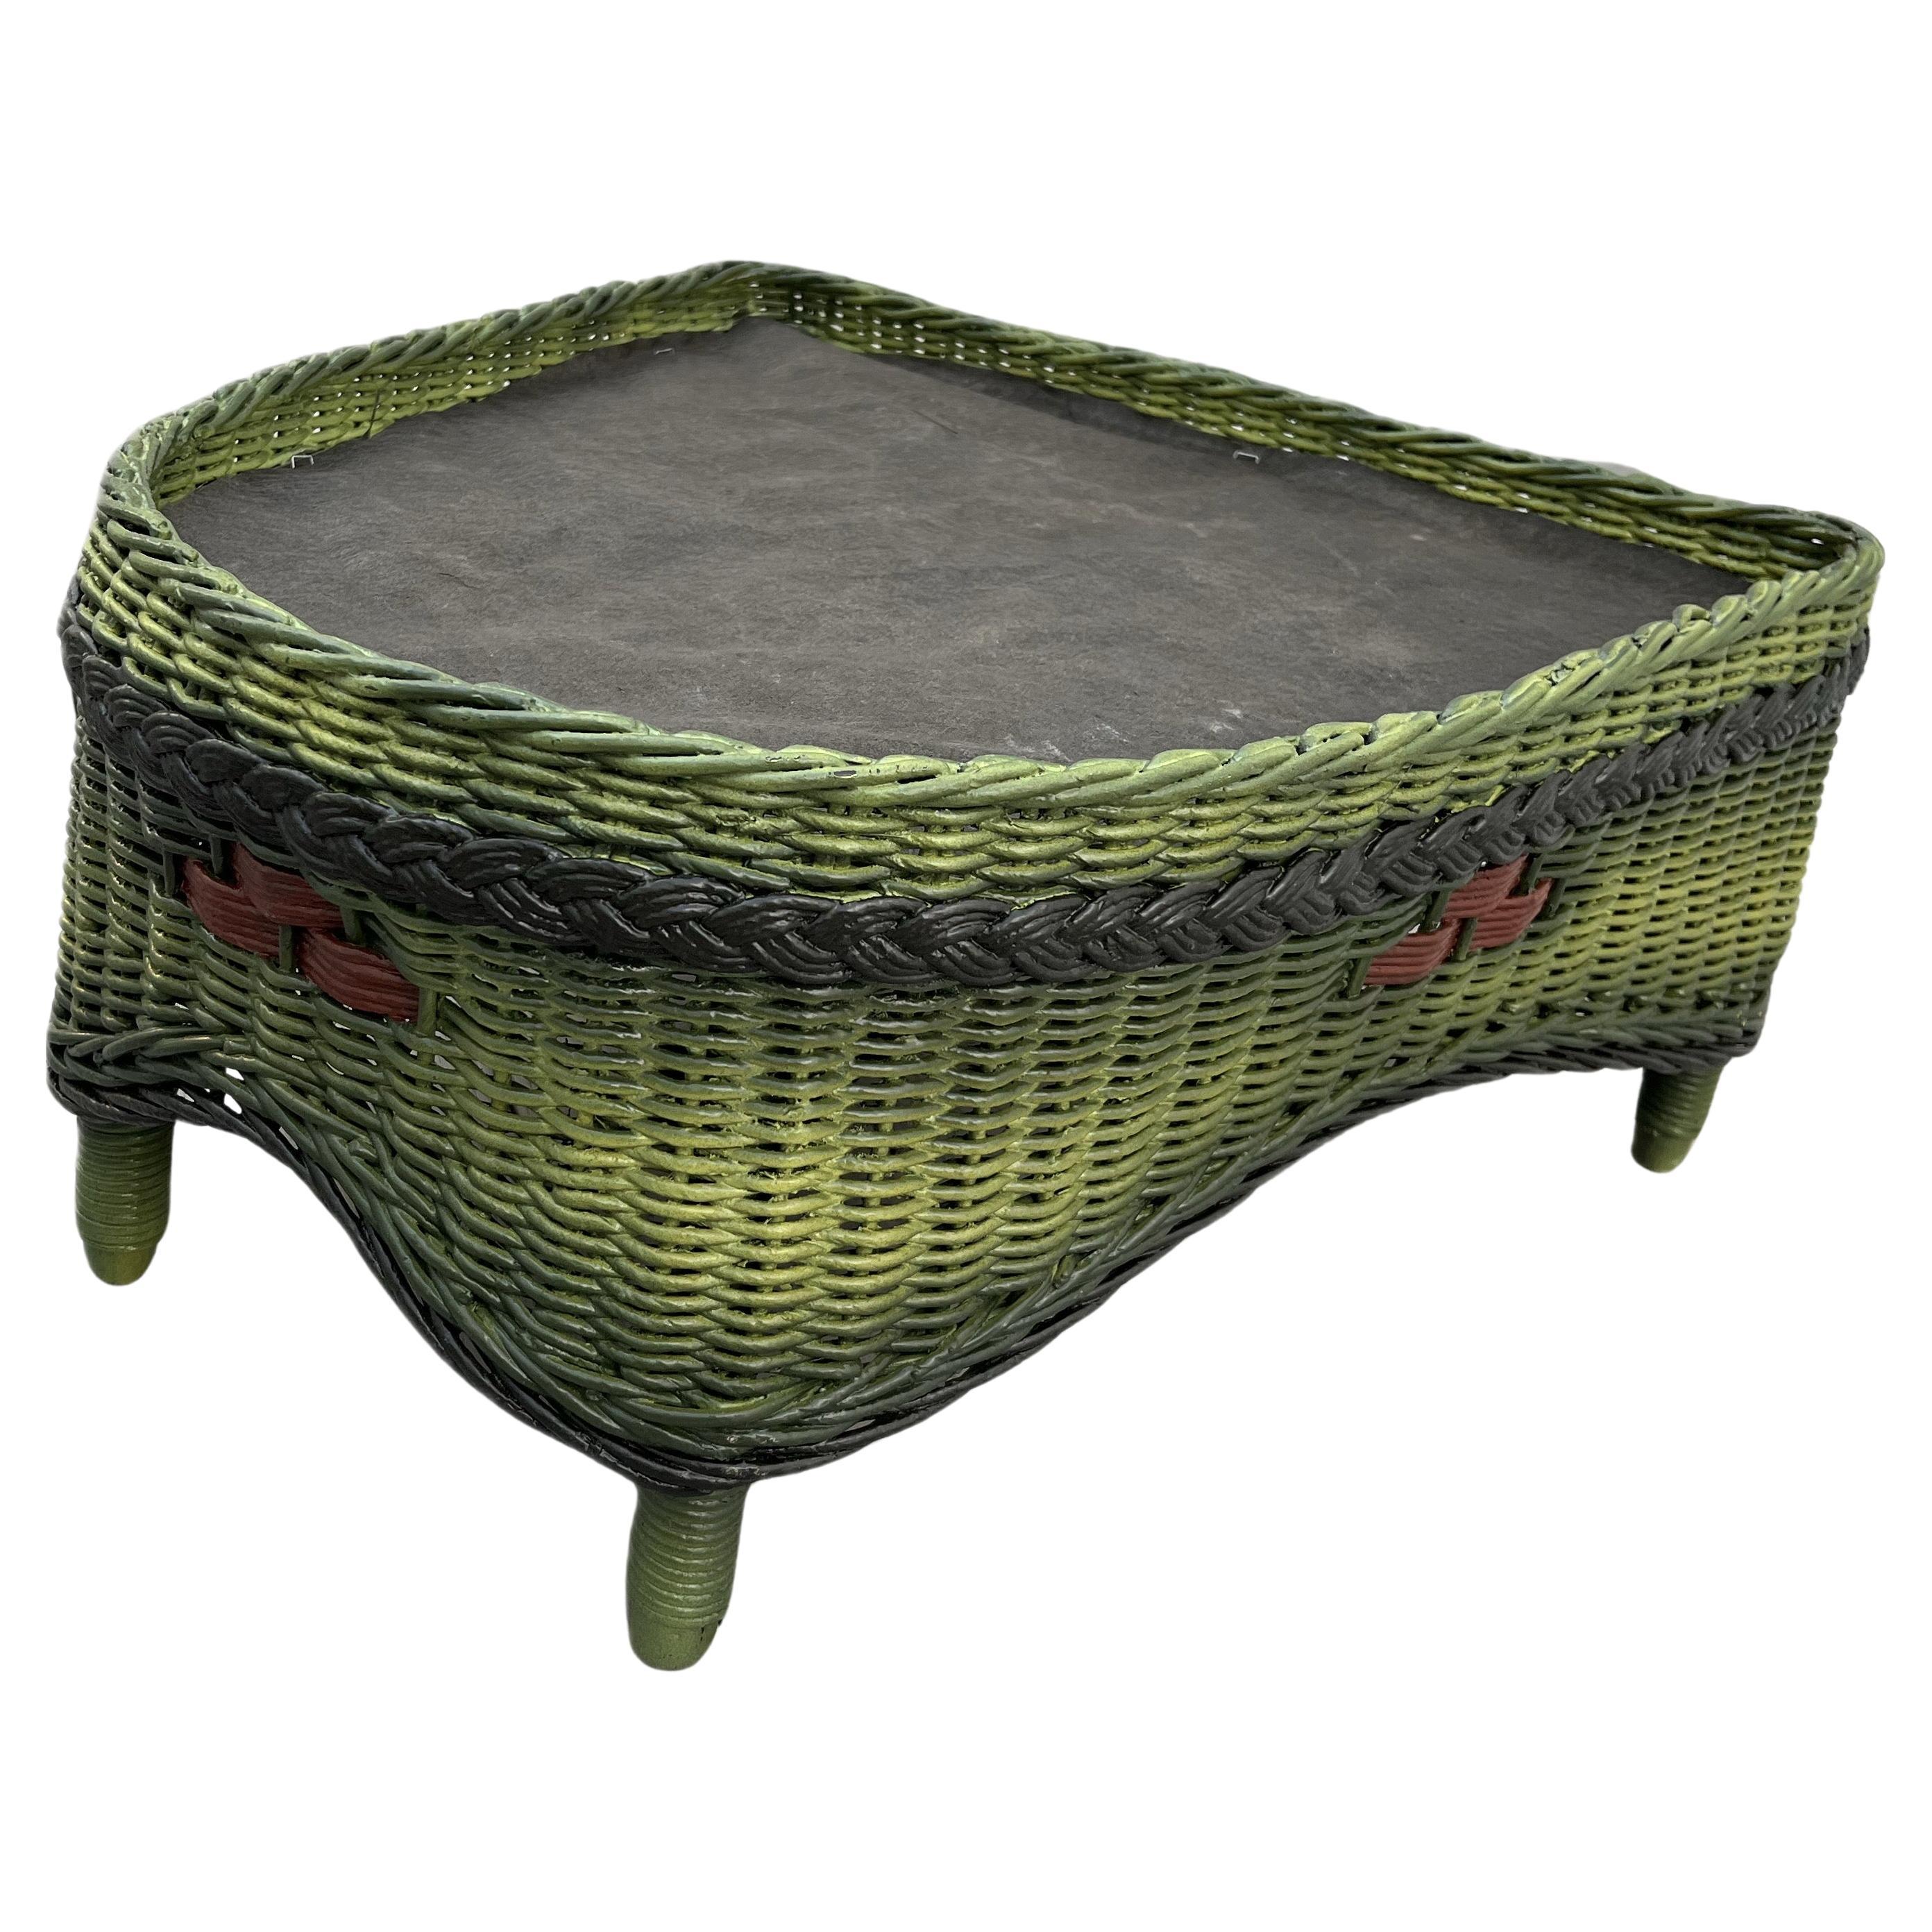 A Close Woven Wicker Ottoman in French Green Finish with Colored Accents For Sale